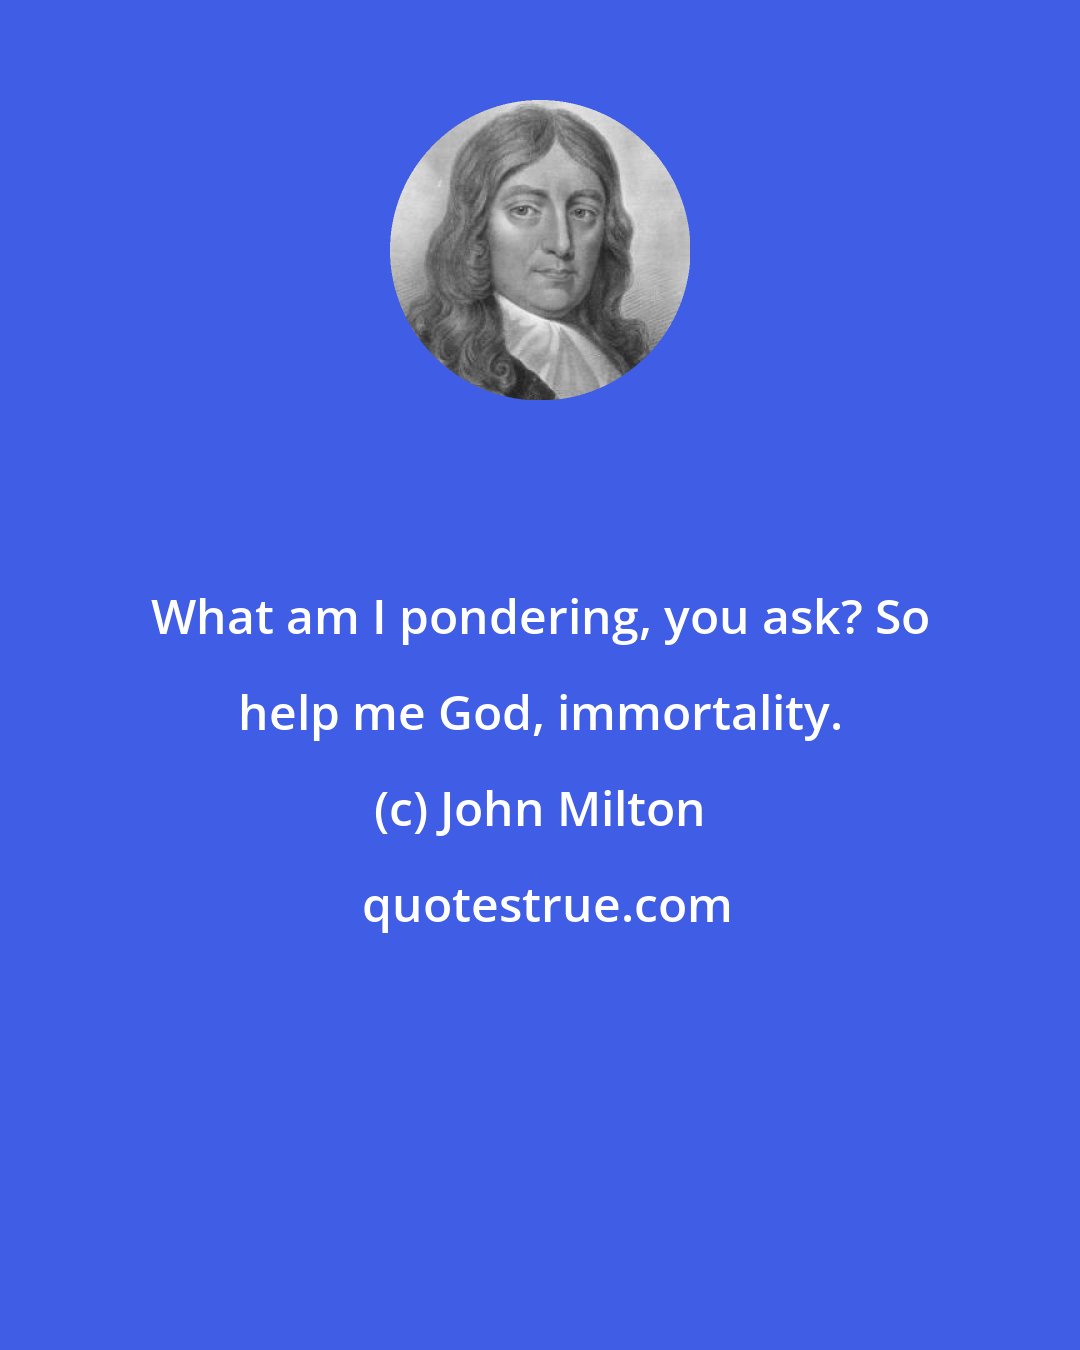 John Milton: What am I pondering, you ask? So help me God, immortality.